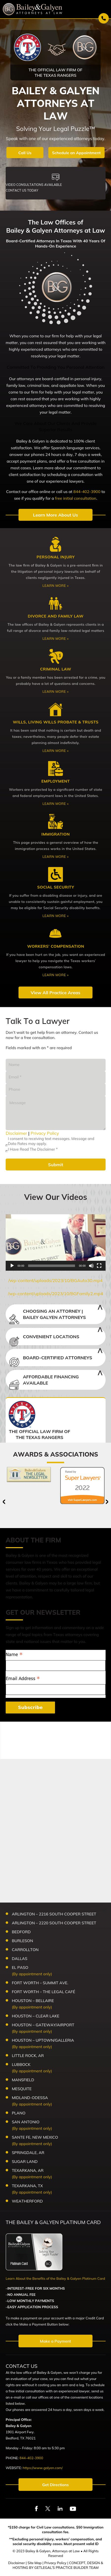 Bailey & Galyen, Attorneys at Law - Fort Worth TX Lawyers